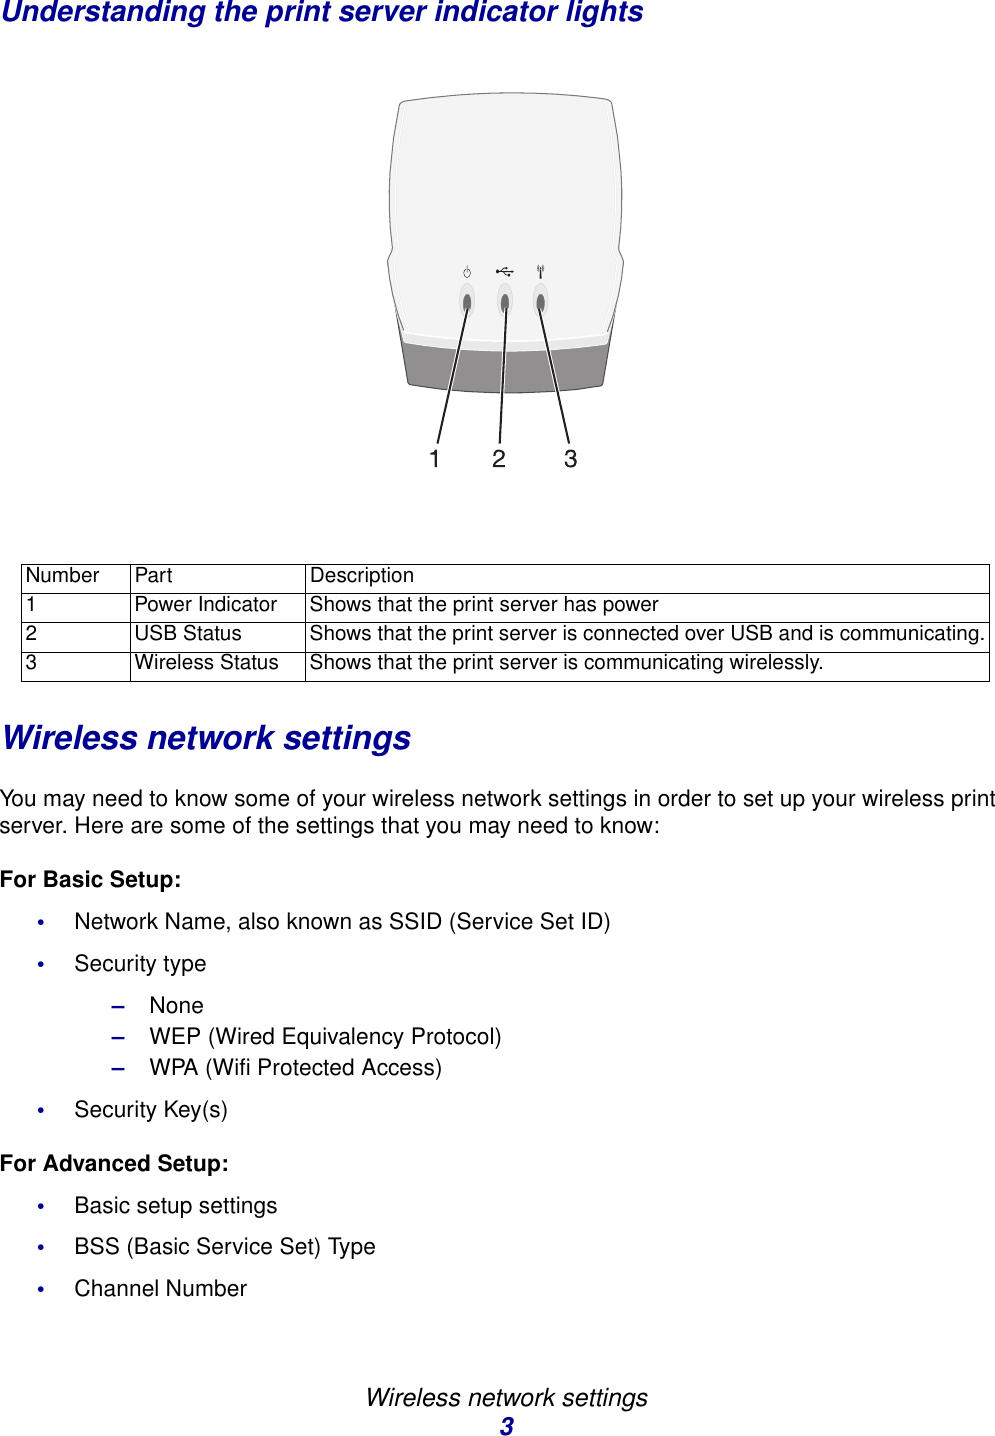 Wireless network settings3Understanding the print server indicator lightsWireless network settingsYou may need to know some of your wireless network settings in order to set up your wireless print server. Here are some of the settings that you may need to know:For Basic Setup:•Network Name, also known as SSID (Service Set ID)•Security type–None–WEP (Wired Equivalency Protocol)–WPA (Wifi Protected Access) •Security Key(s)For Advanced Setup:•Basic setup settings •BSS (Basic Service Set) Type•Channel NumberNumber Part Description1 Power Indicator  Shows that the print server has power2 USB Status Shows that the print server is connected over USB and is communicating.3 Wireless Status Shows that the print server is communicating wirelessly. 